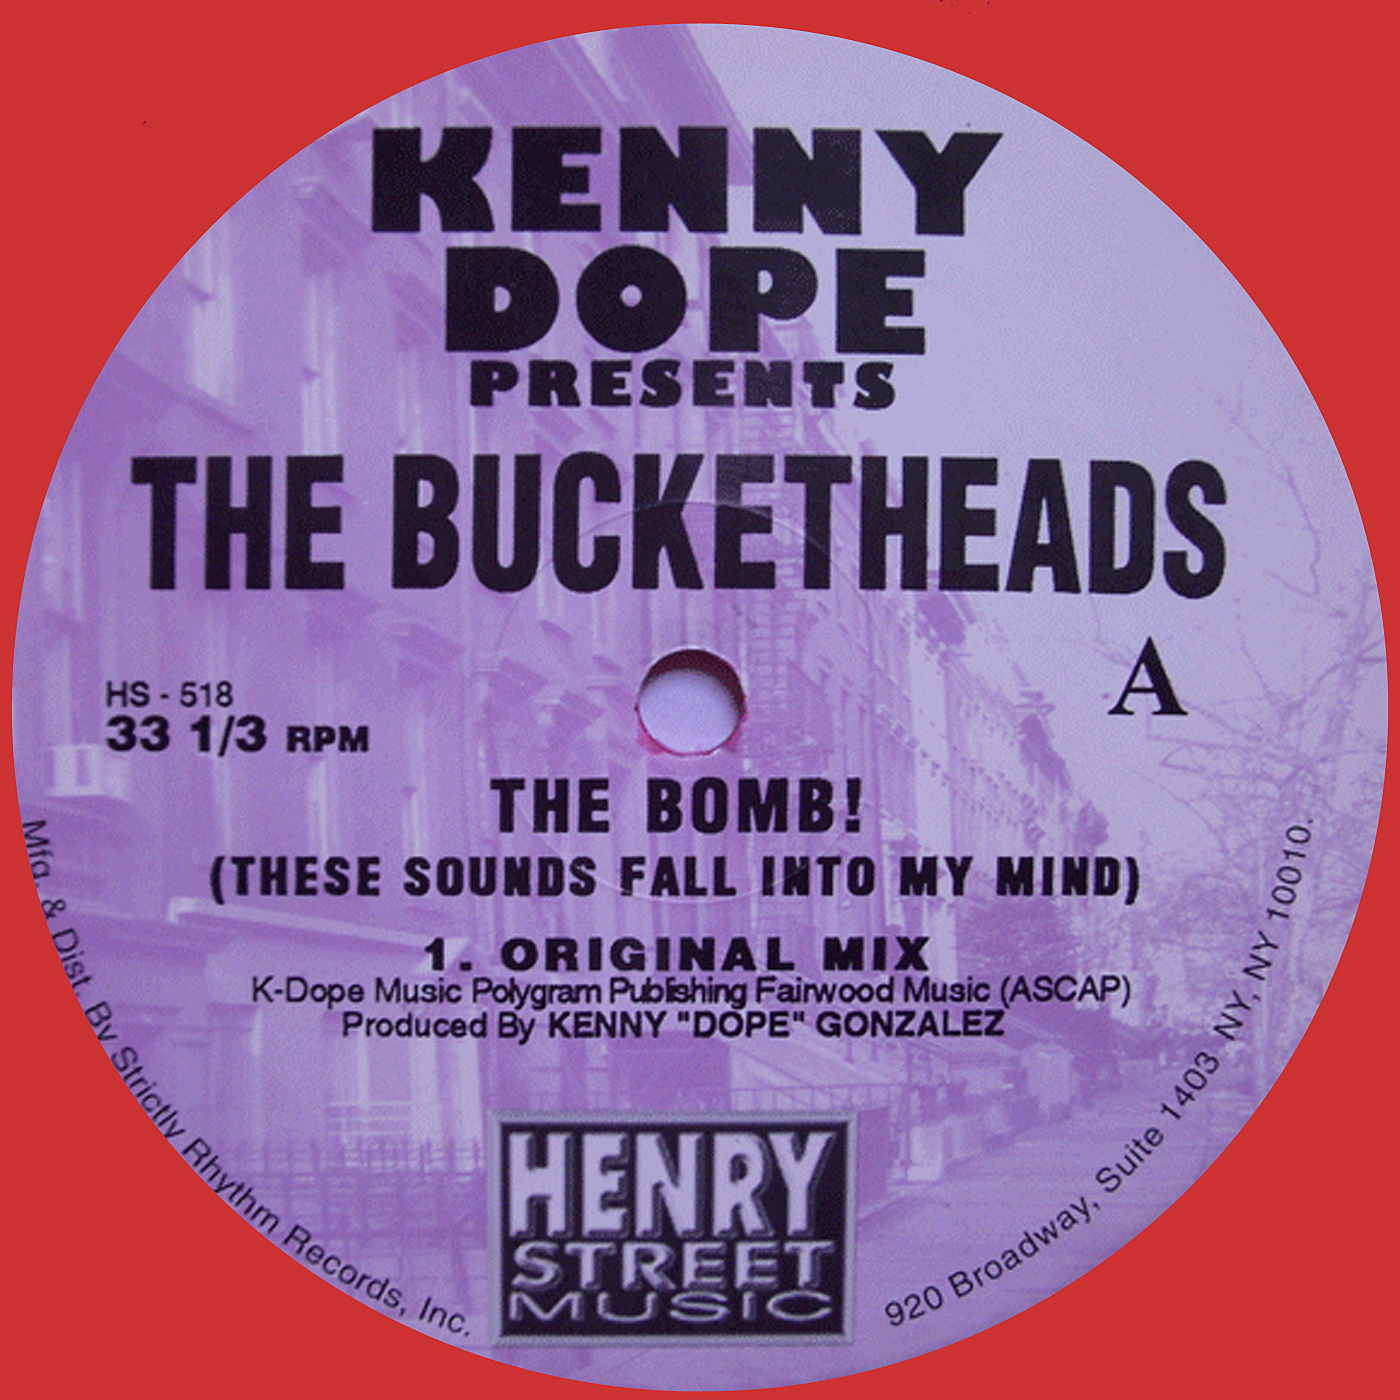 Kenny "Dope" presents The Bucketheads - The Bomb! (These Sounds Fall Into My Mind)(HS-518-R)